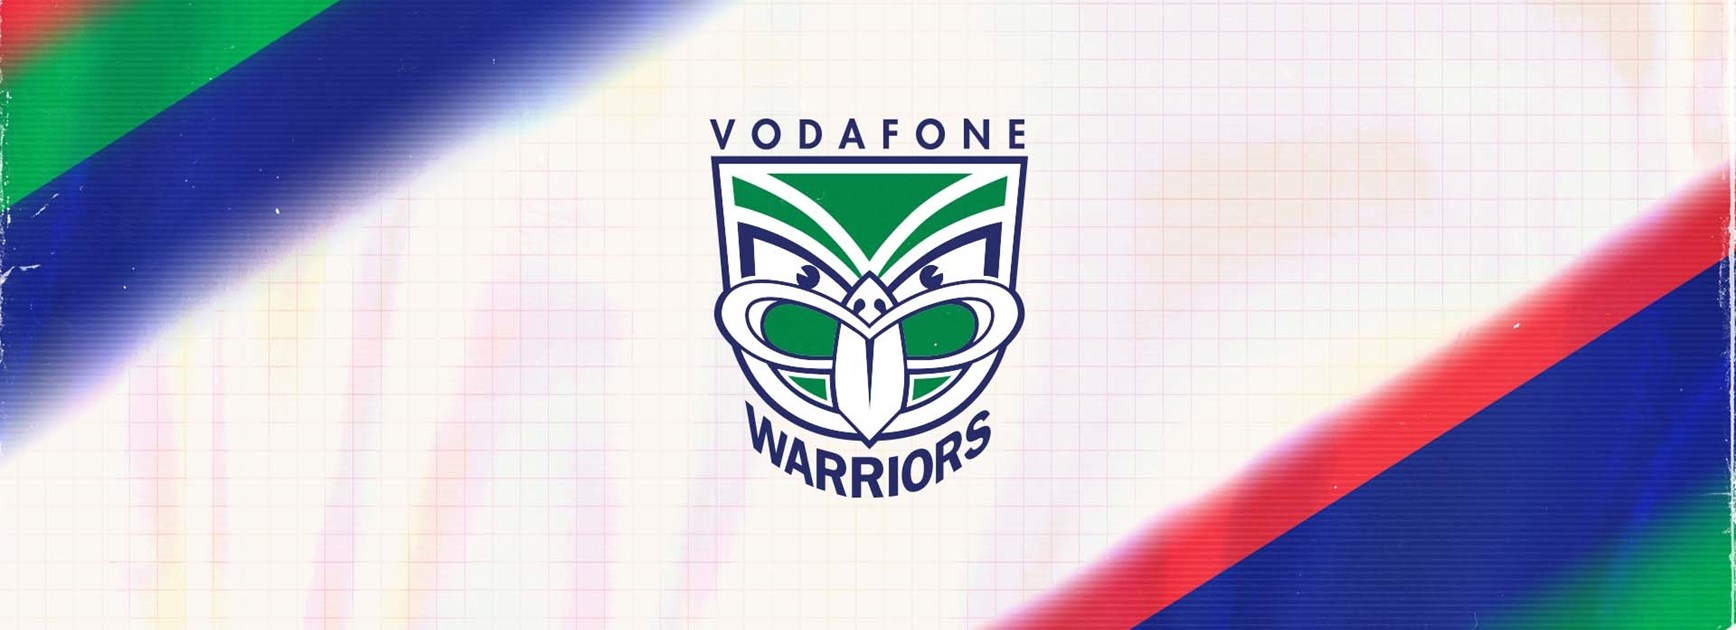 Statement about Vodafone Warriors member Calley Gibbons